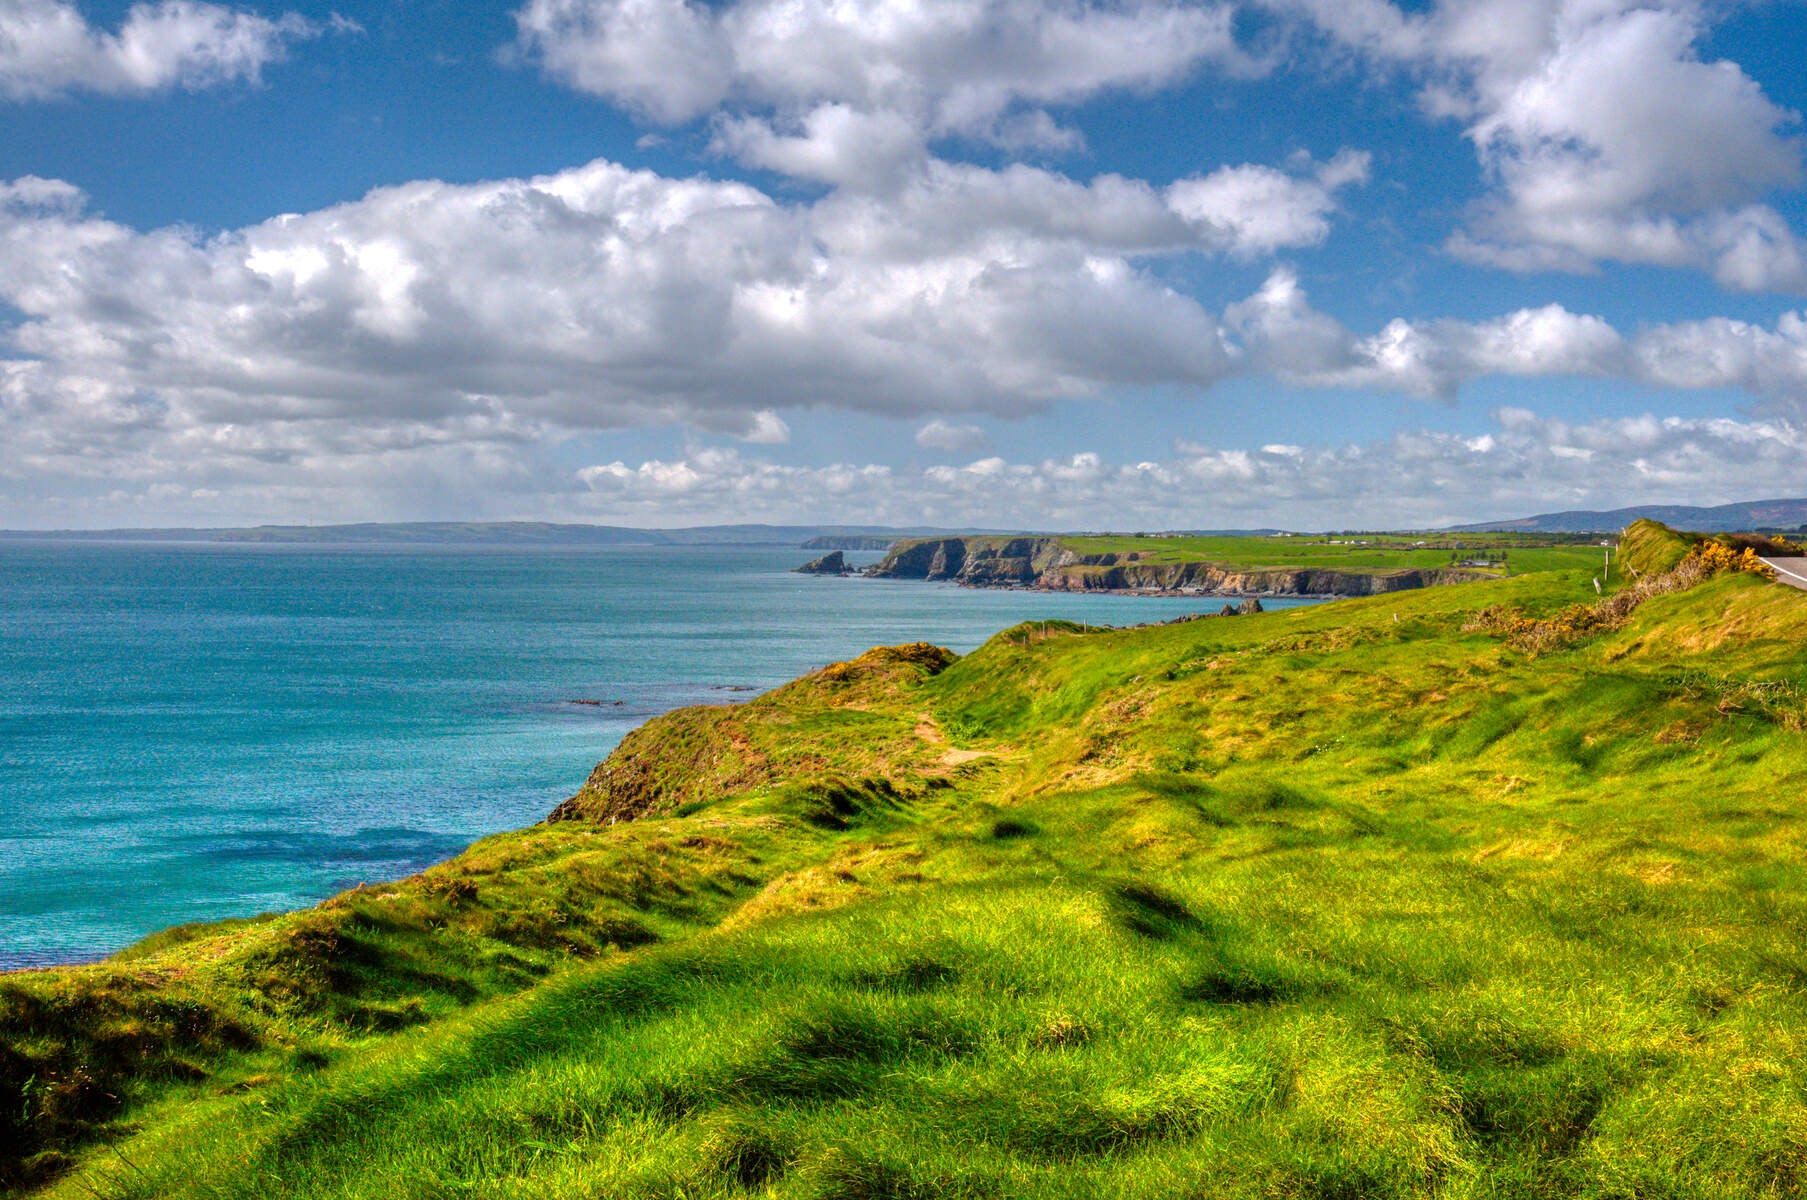 Copper Coast, Co Waterford, Ireland